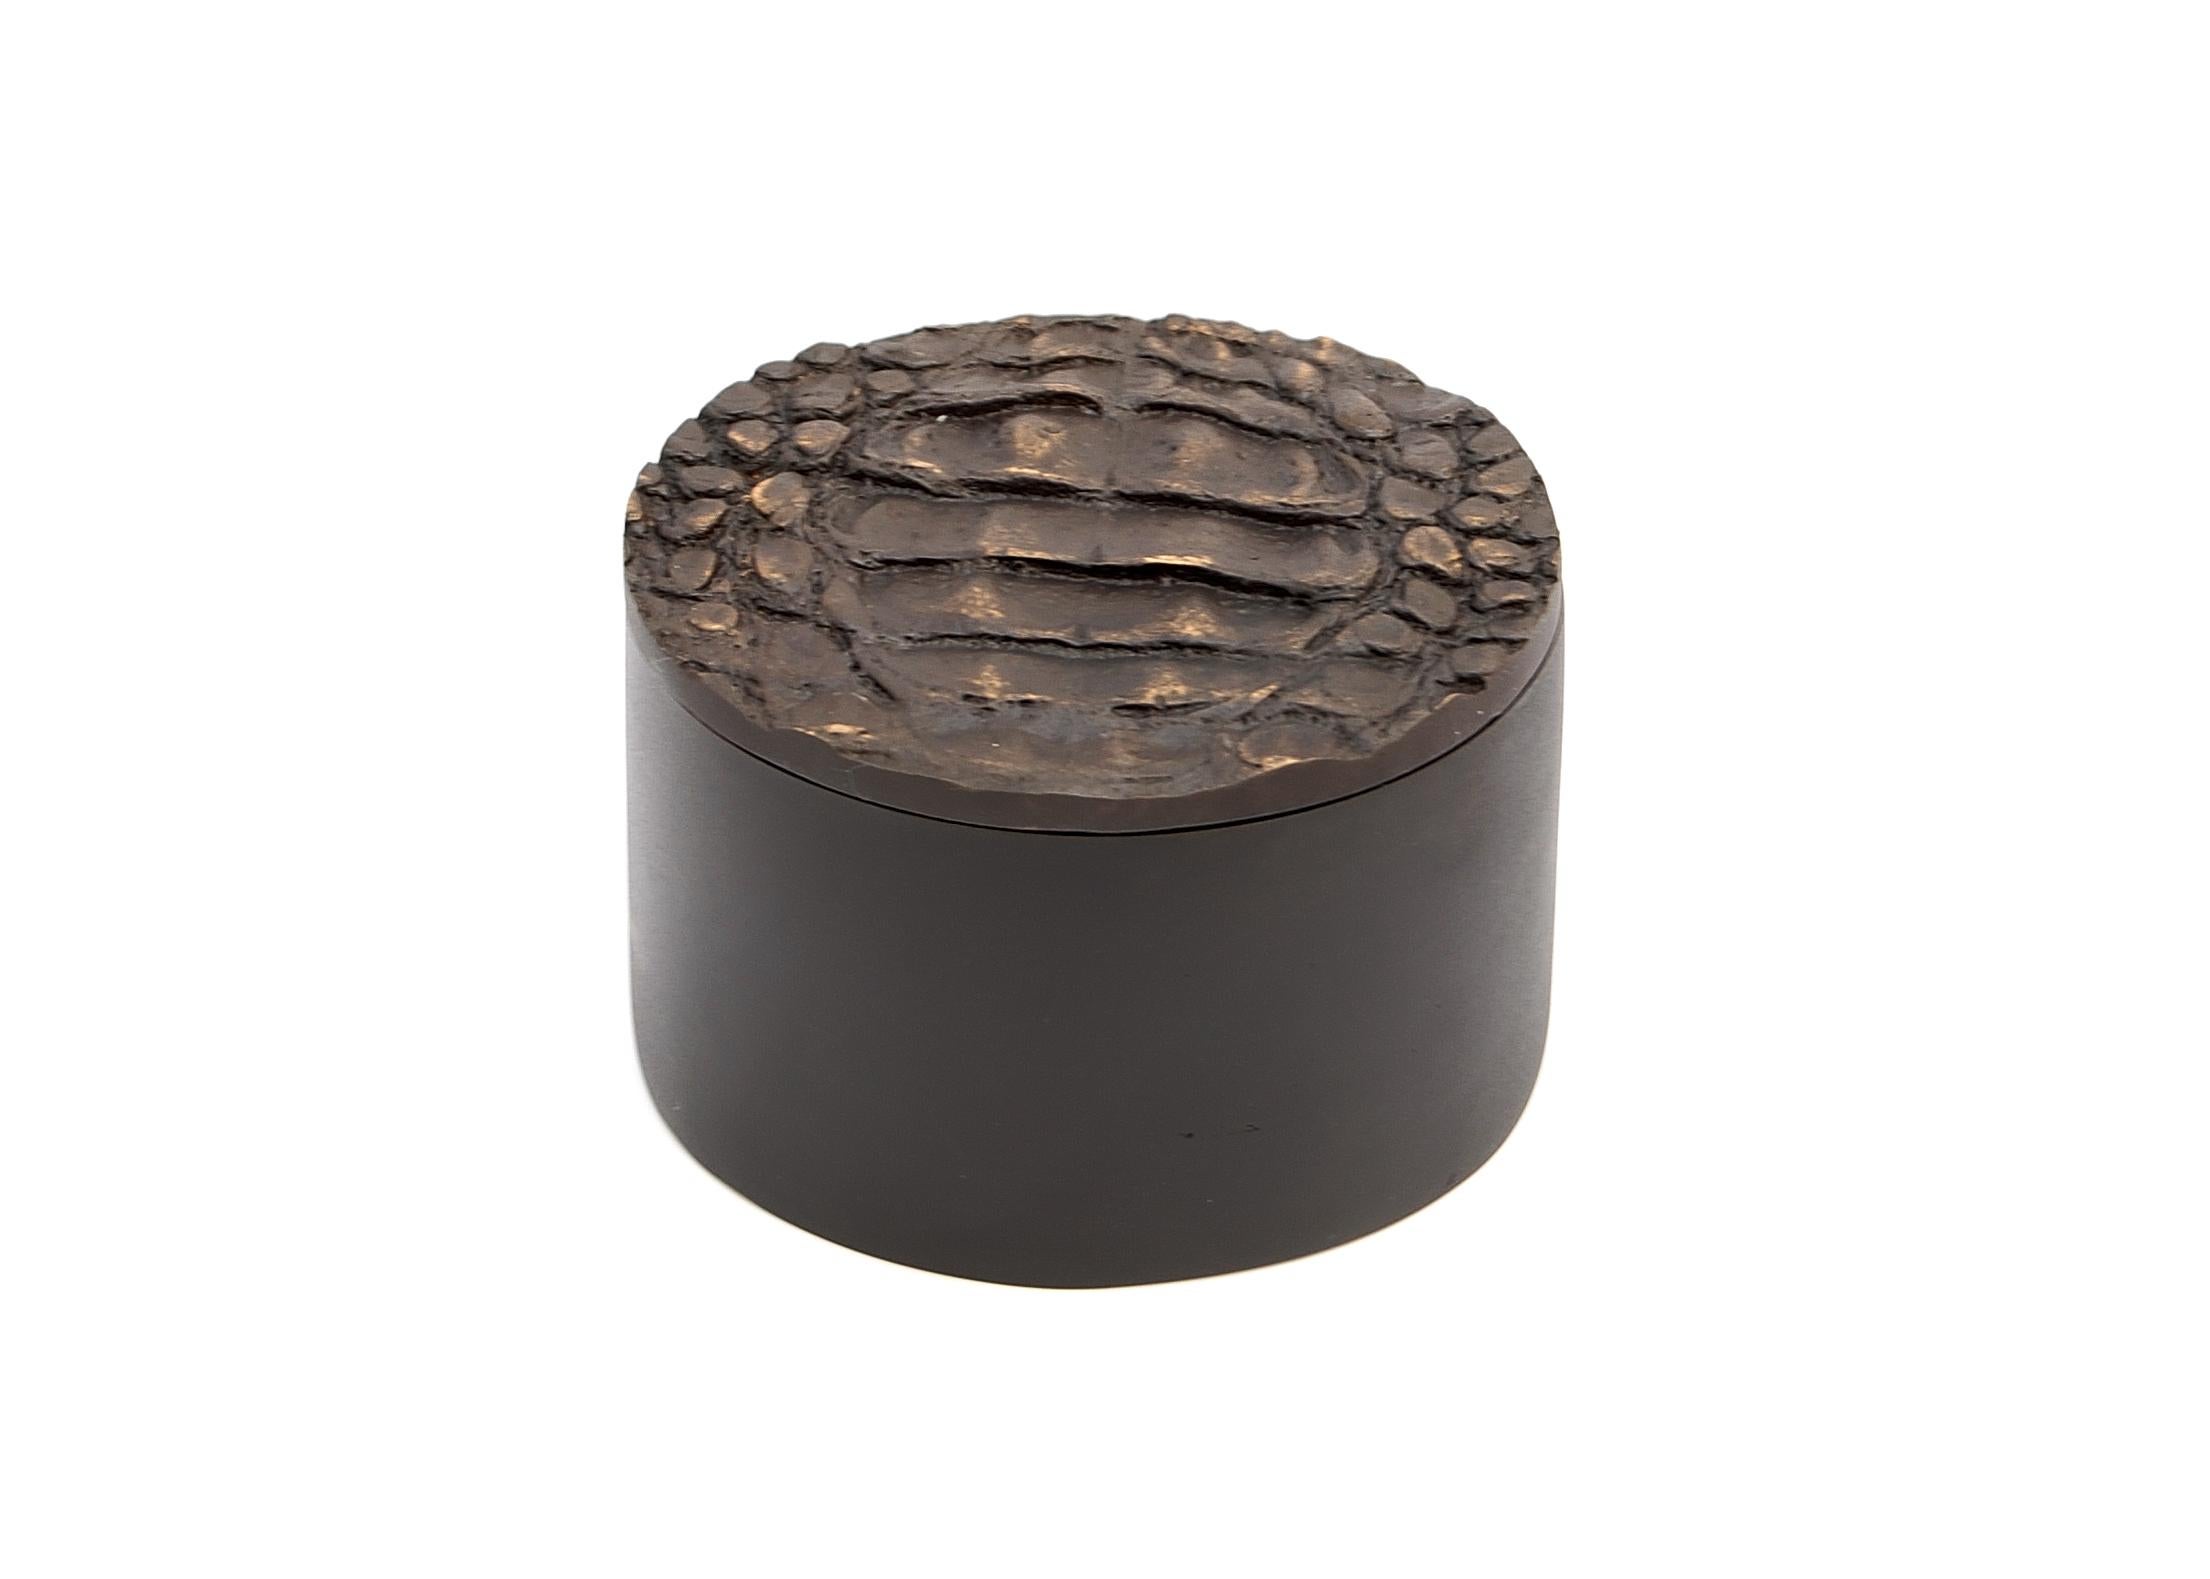 Mark small box by Fakasaka Design
Dimensions: W 10 cm D 10 cm H 6.5 cm.
Materials: black/brown bronze.
Also available in polished bronze. 

 FAKASAKA is a design company focused on production of high-end furniture, lighting, decorative objects,